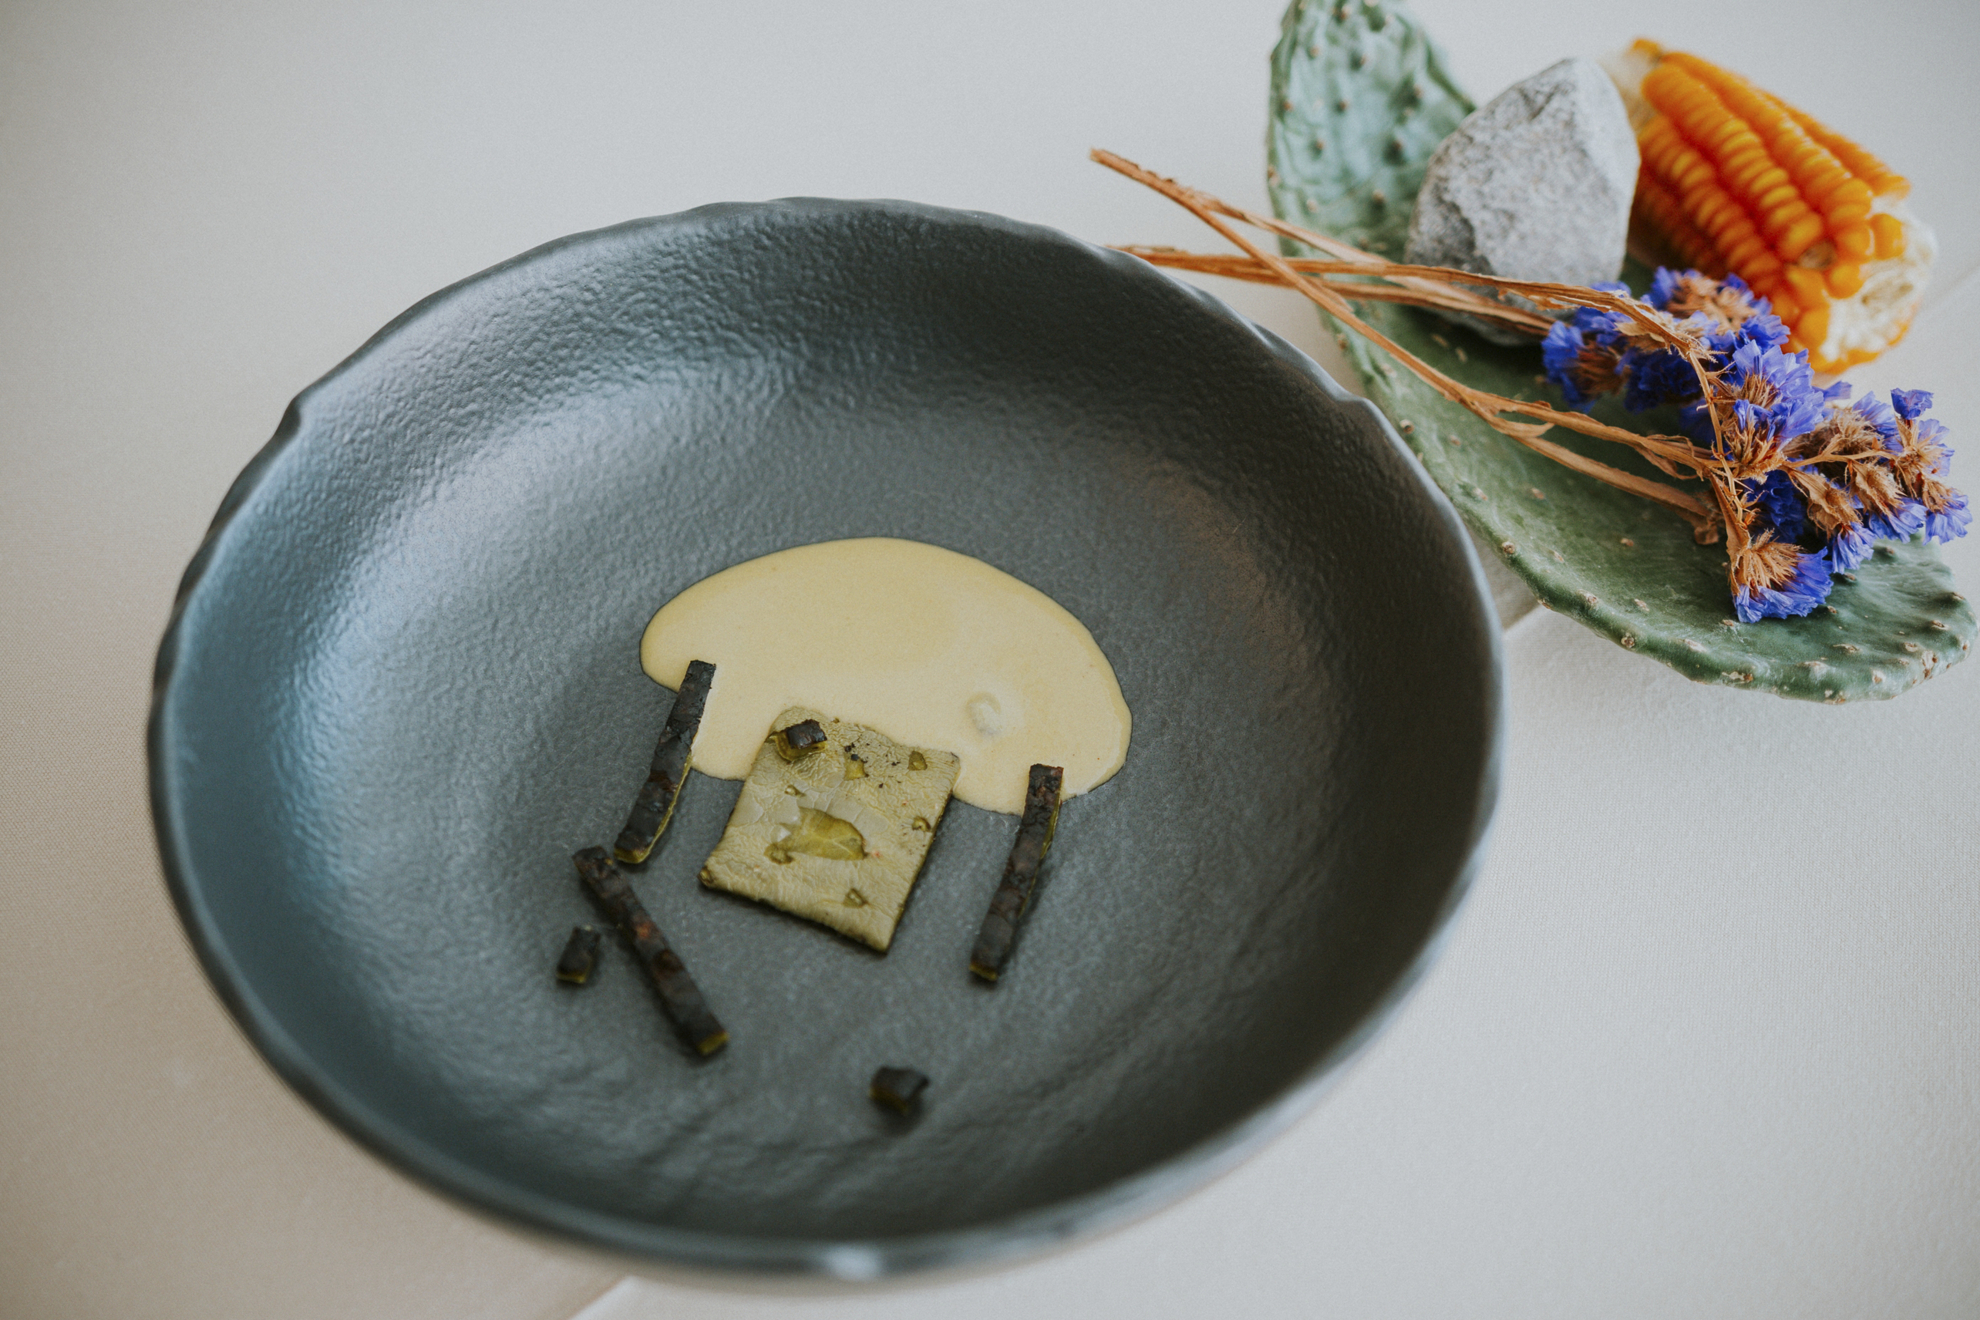 Hotels with Michelin star restaurant: A green plate with a small starter 